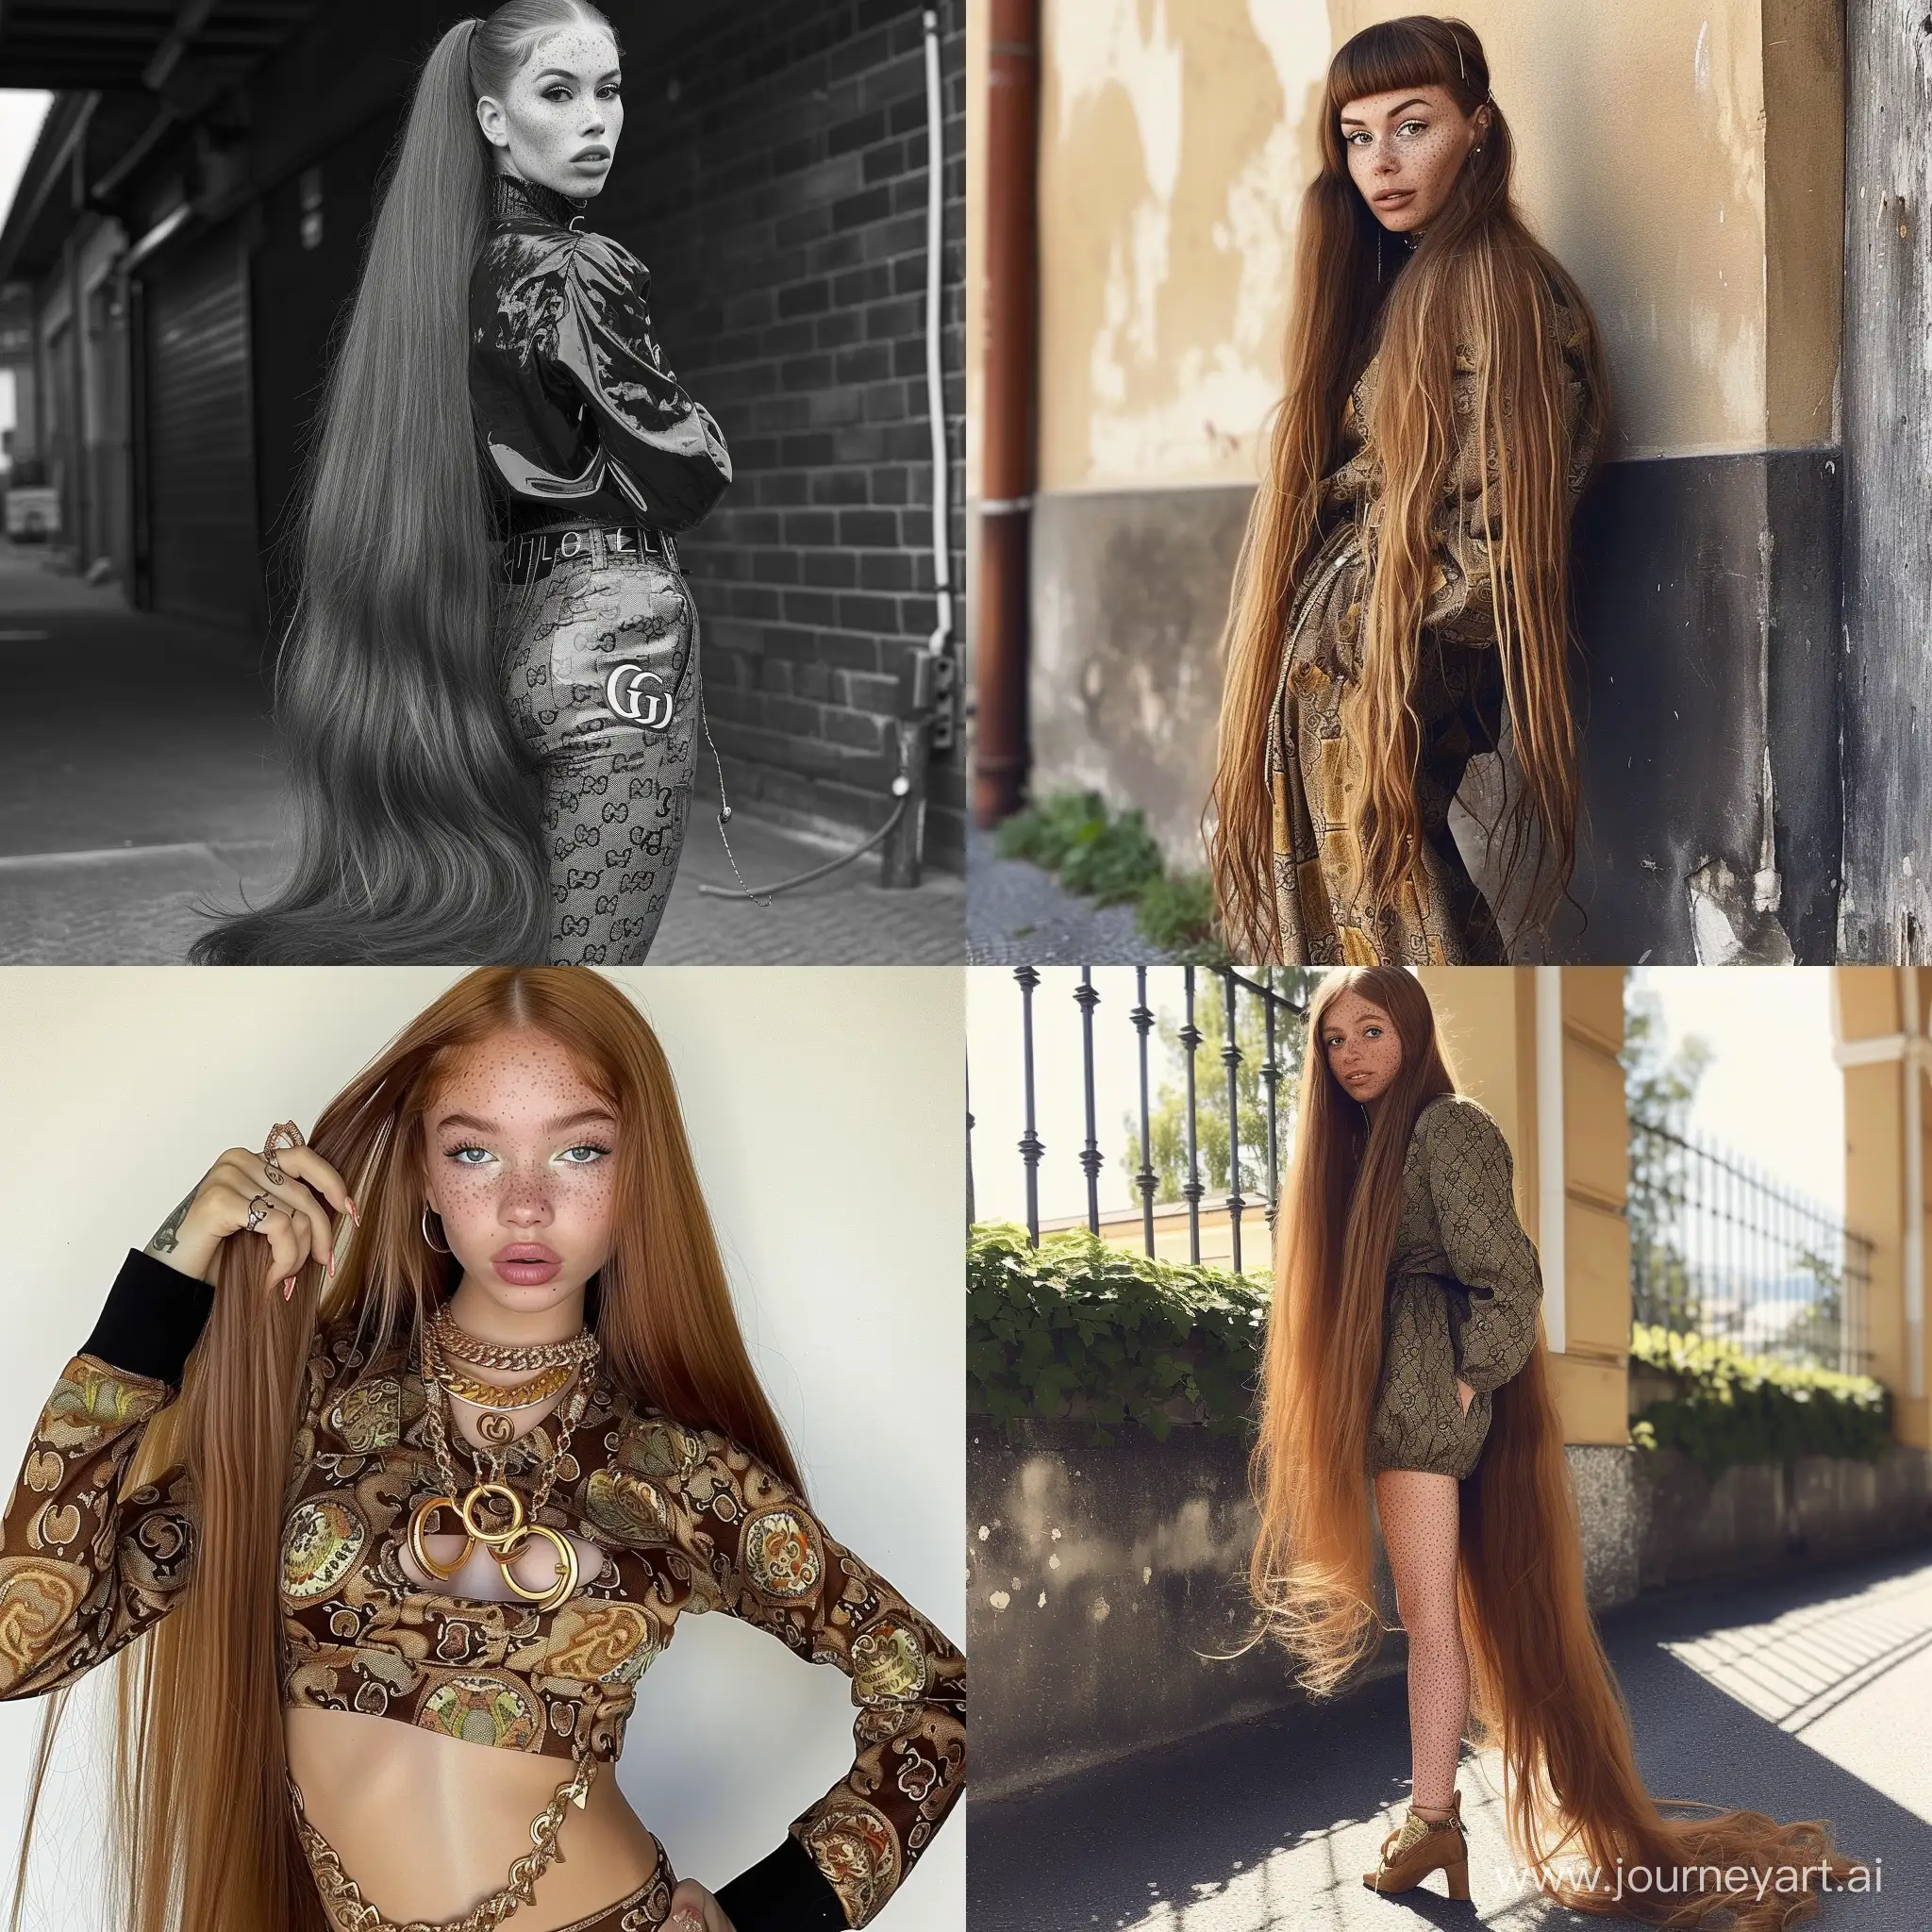 oung woman,instagram influencer, freckles, very extremely long hair, extremely skinny body, extremely narrow waist, baddie vibe, extravagant outfit, very expensive brand of clothes, street style clothes, gucci closthes, baddie clothes